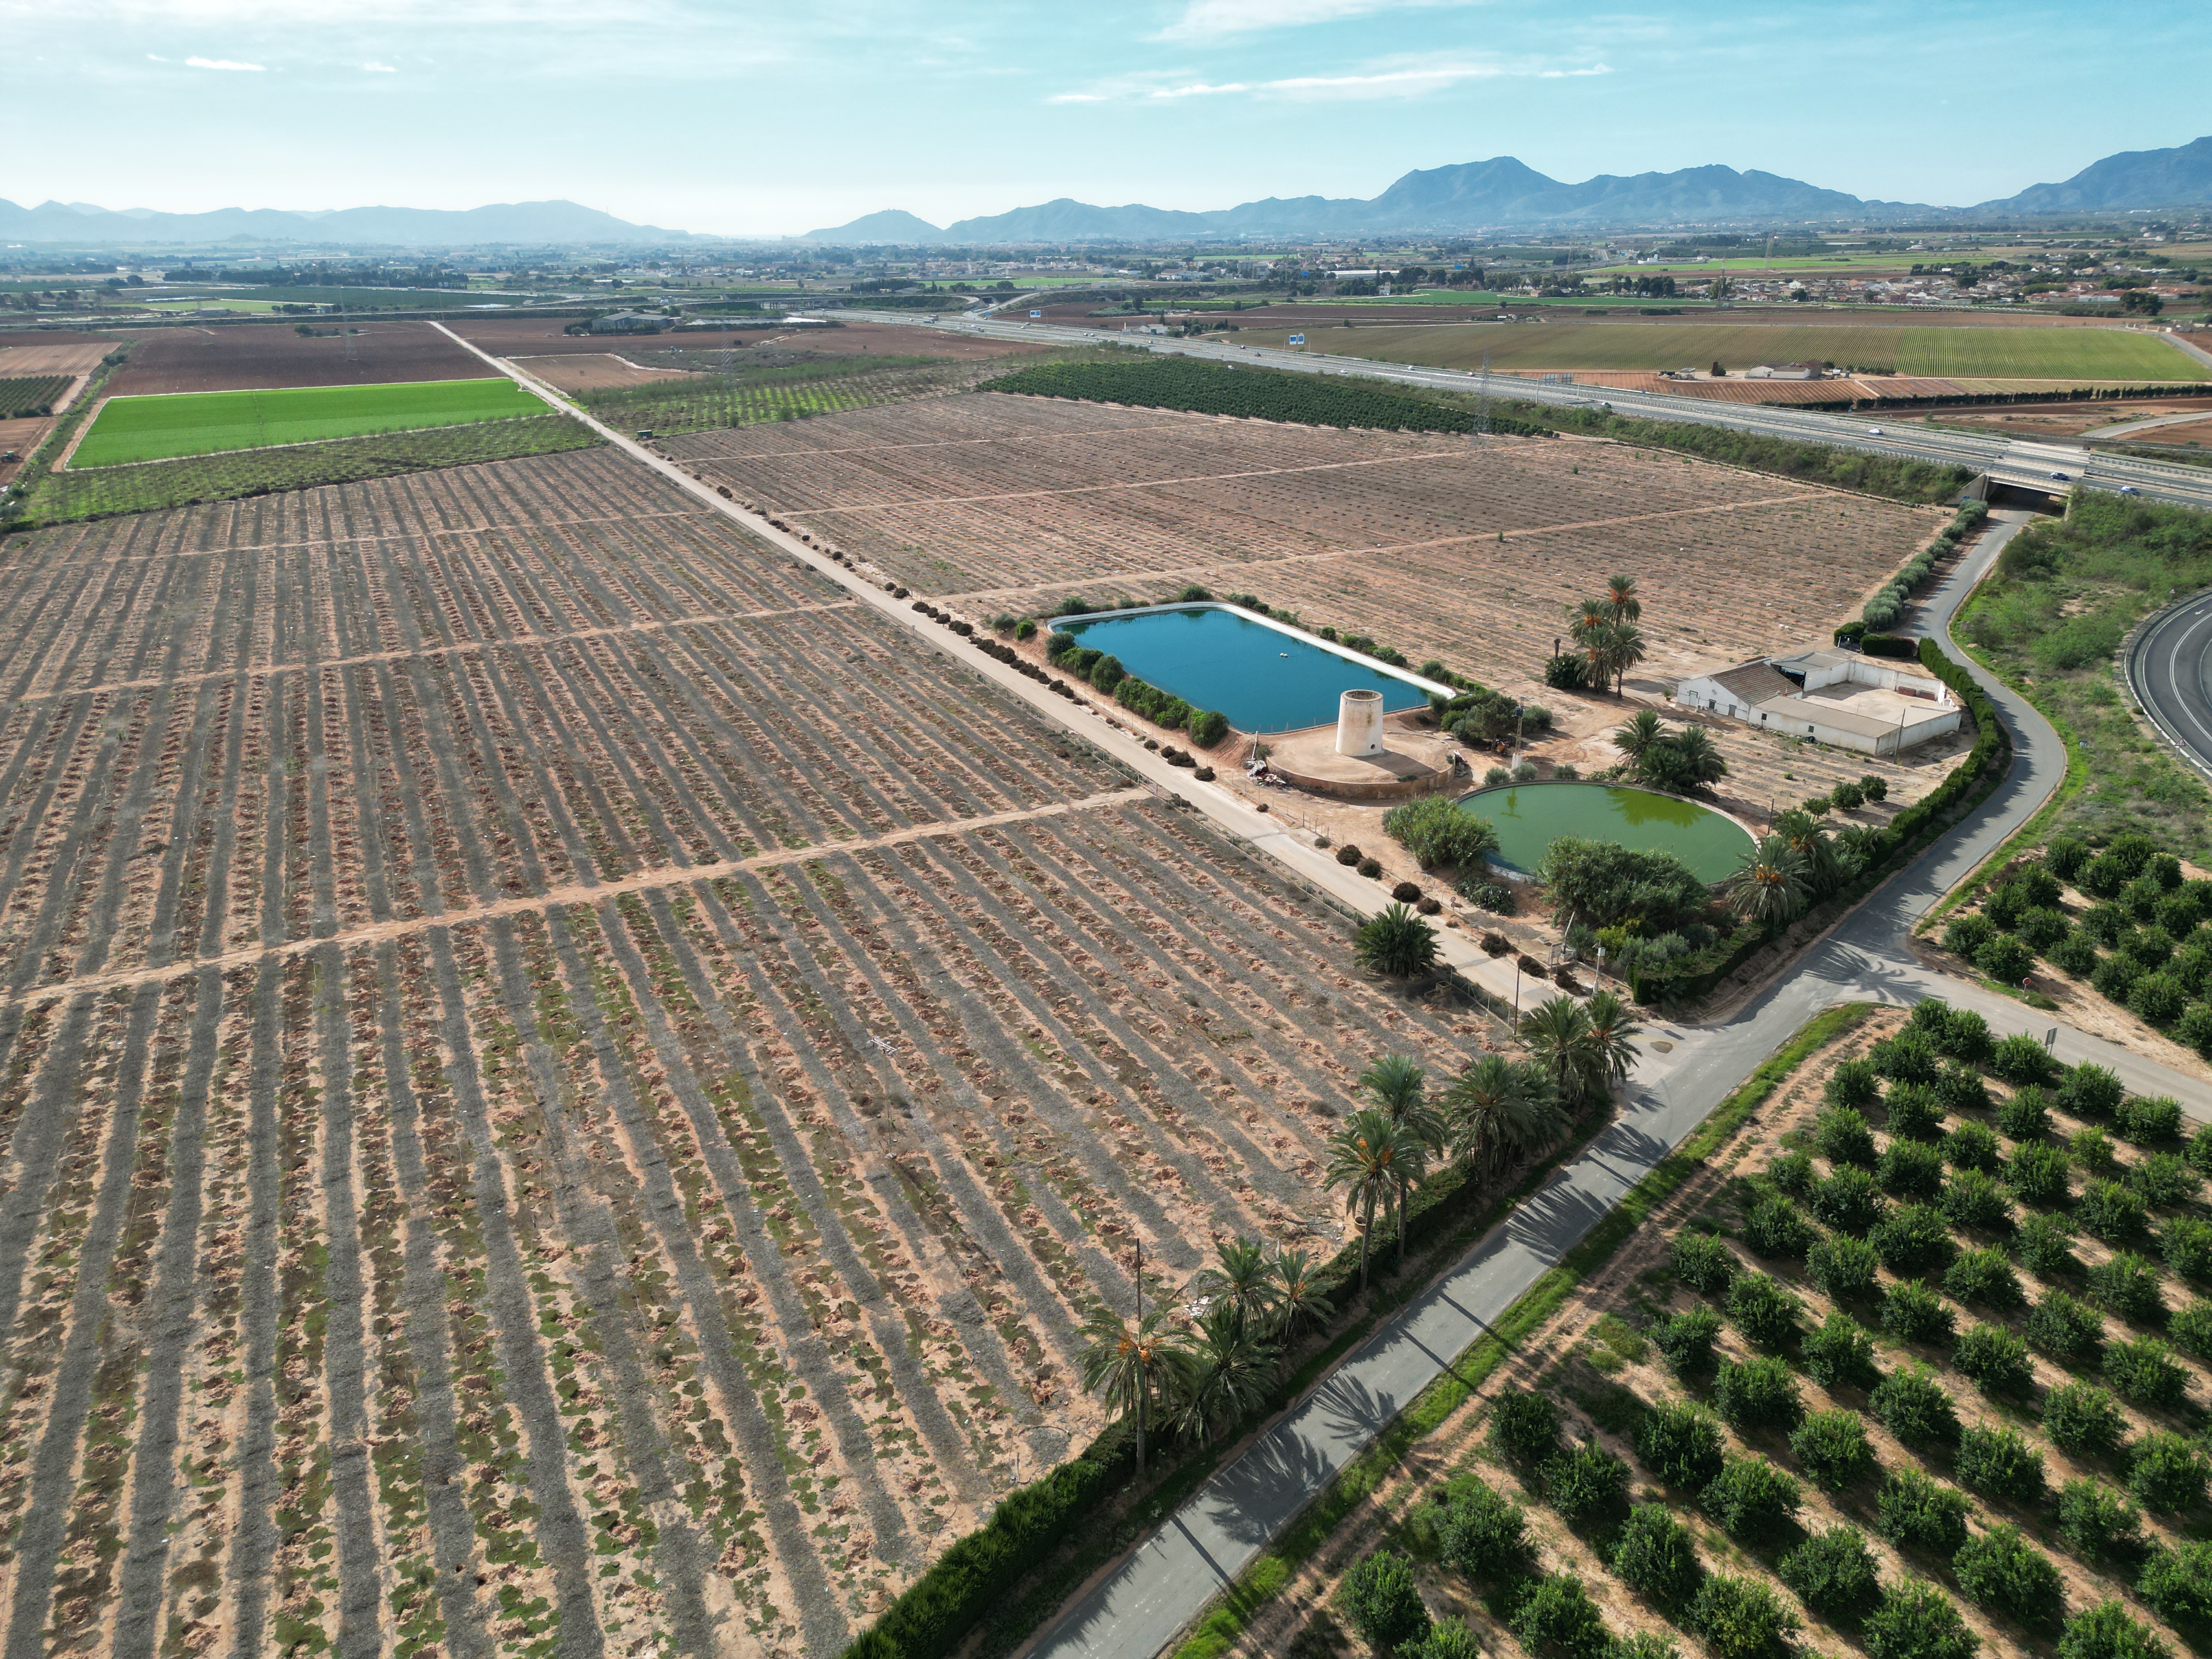 The recently acquired farm in Murcia, Spain.